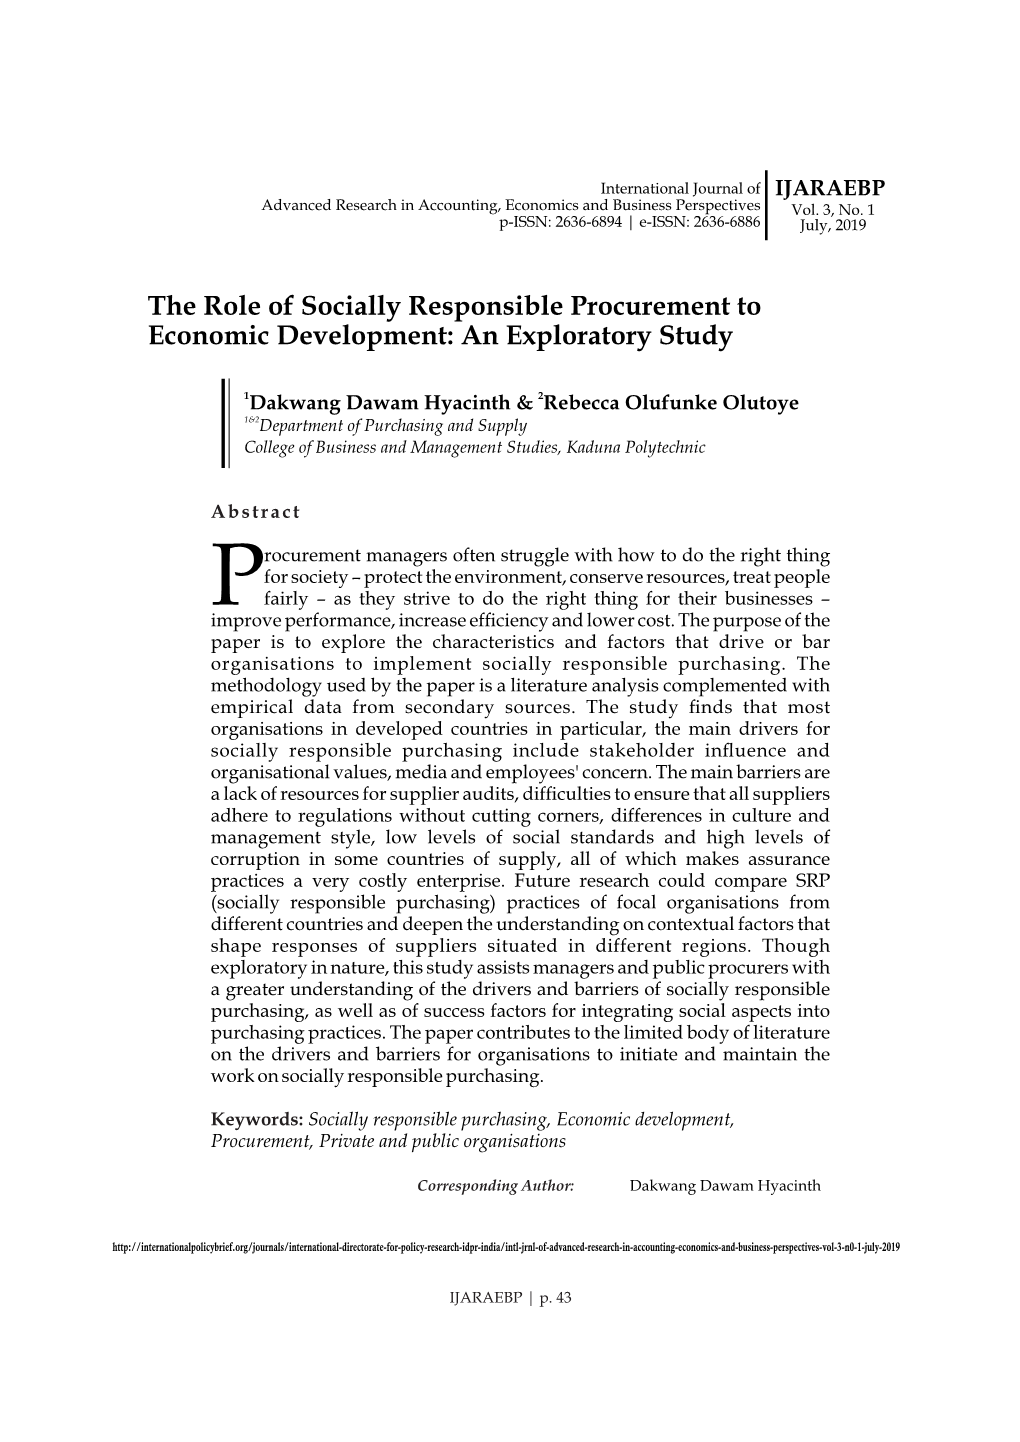 The Role of Socially Responsible Procurement to Economic Development: an Exploratory Study